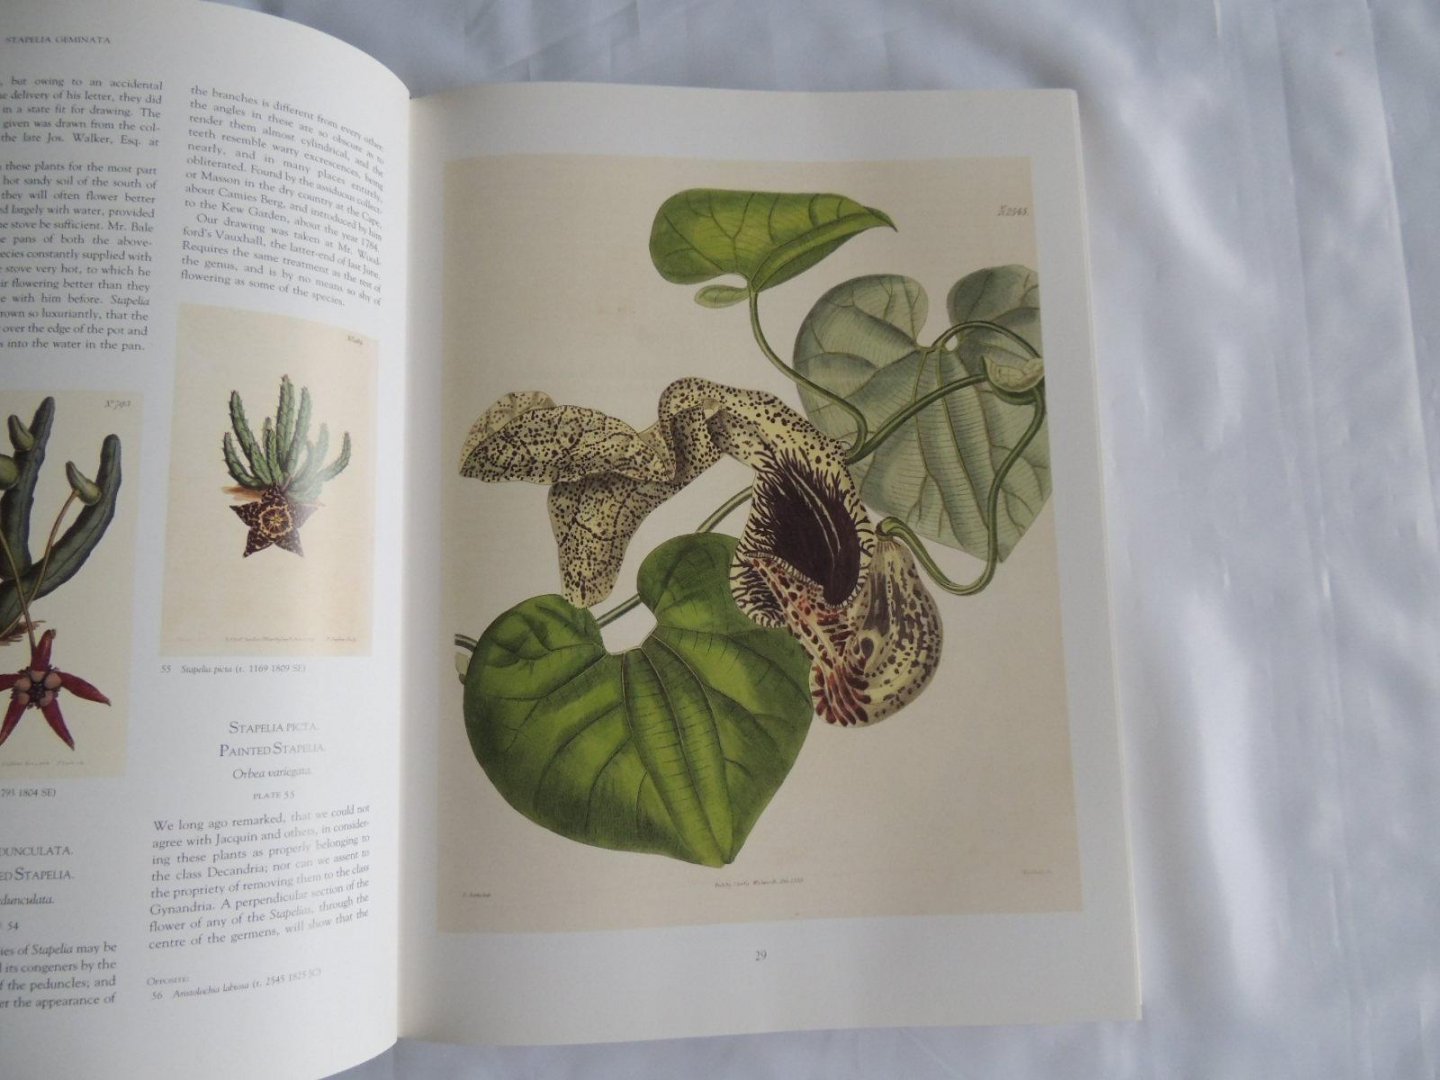 RIX, Martyn (introduction by) - Art in Nature. Over 500 Plants illustrated from Curtis's Botanical Magazine.